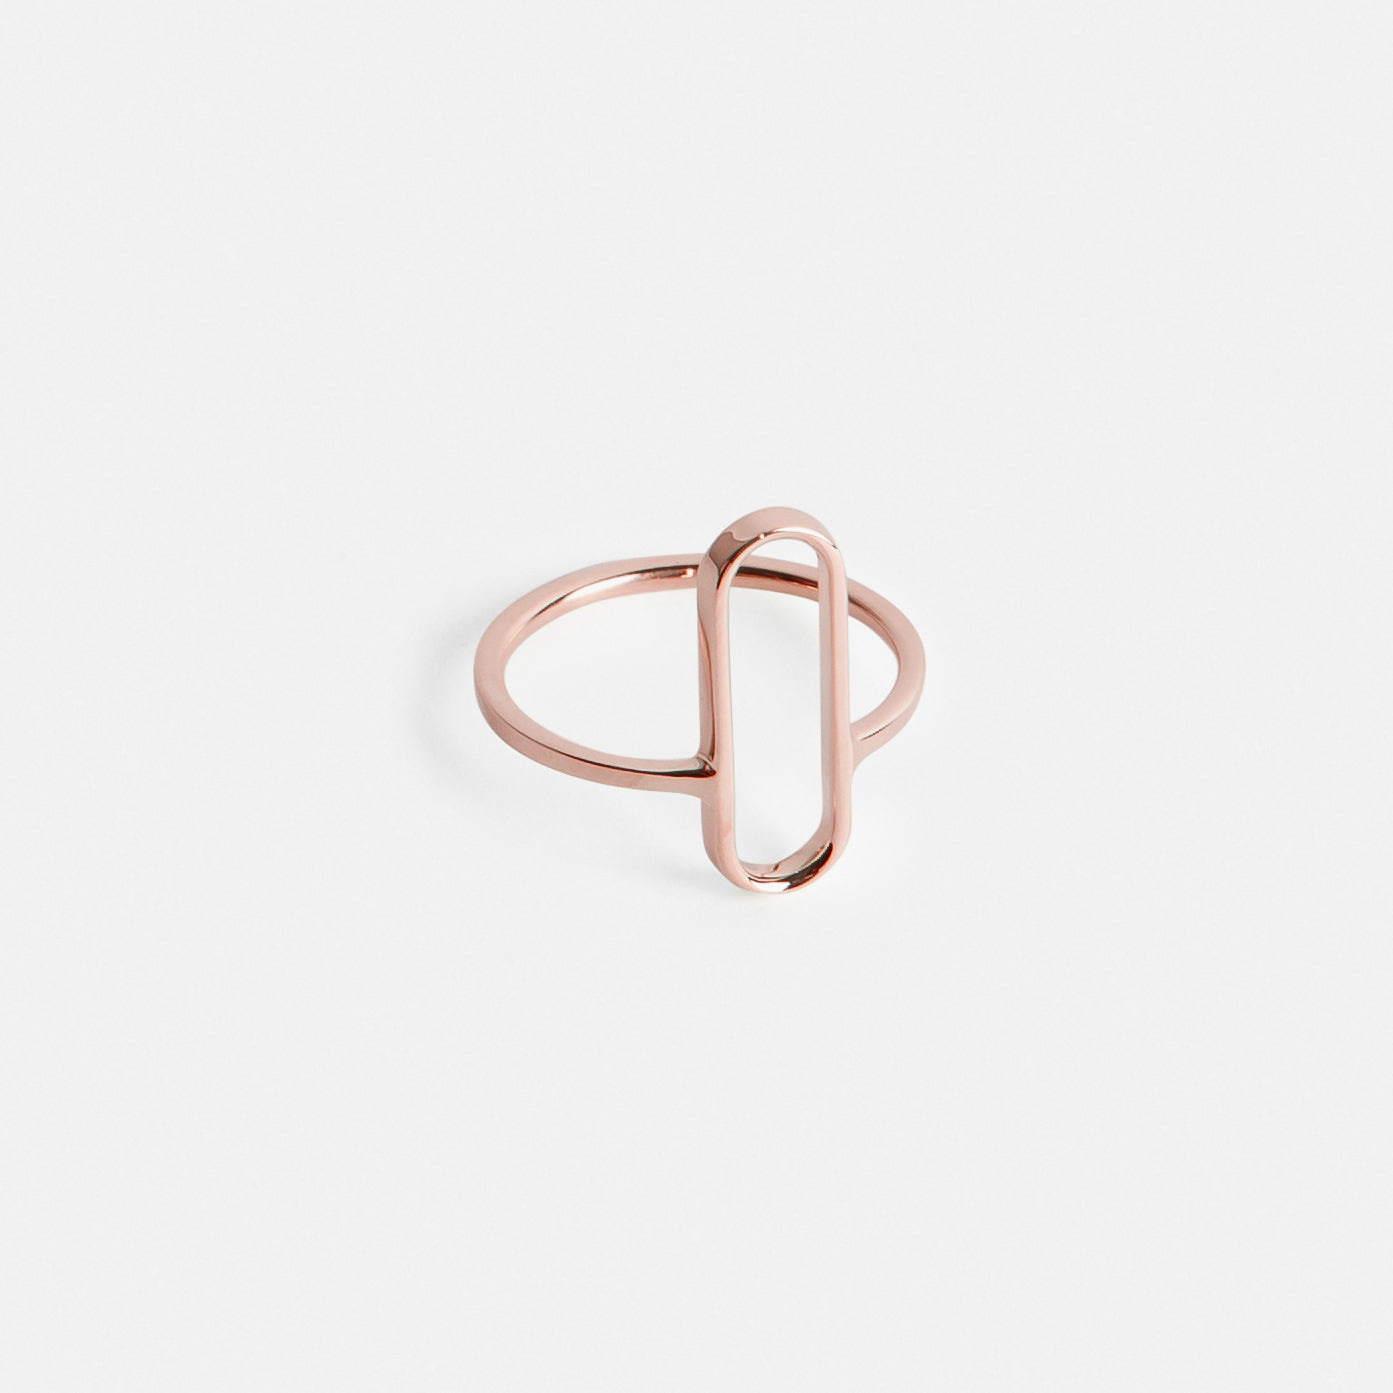 Rengi Unisex Ring in 14k Rose Gold by SHW Fine Jewelry Stacking Large Kaya Ring in 14k Gold set with Ruby by SHW Fine Jewelry in NYC